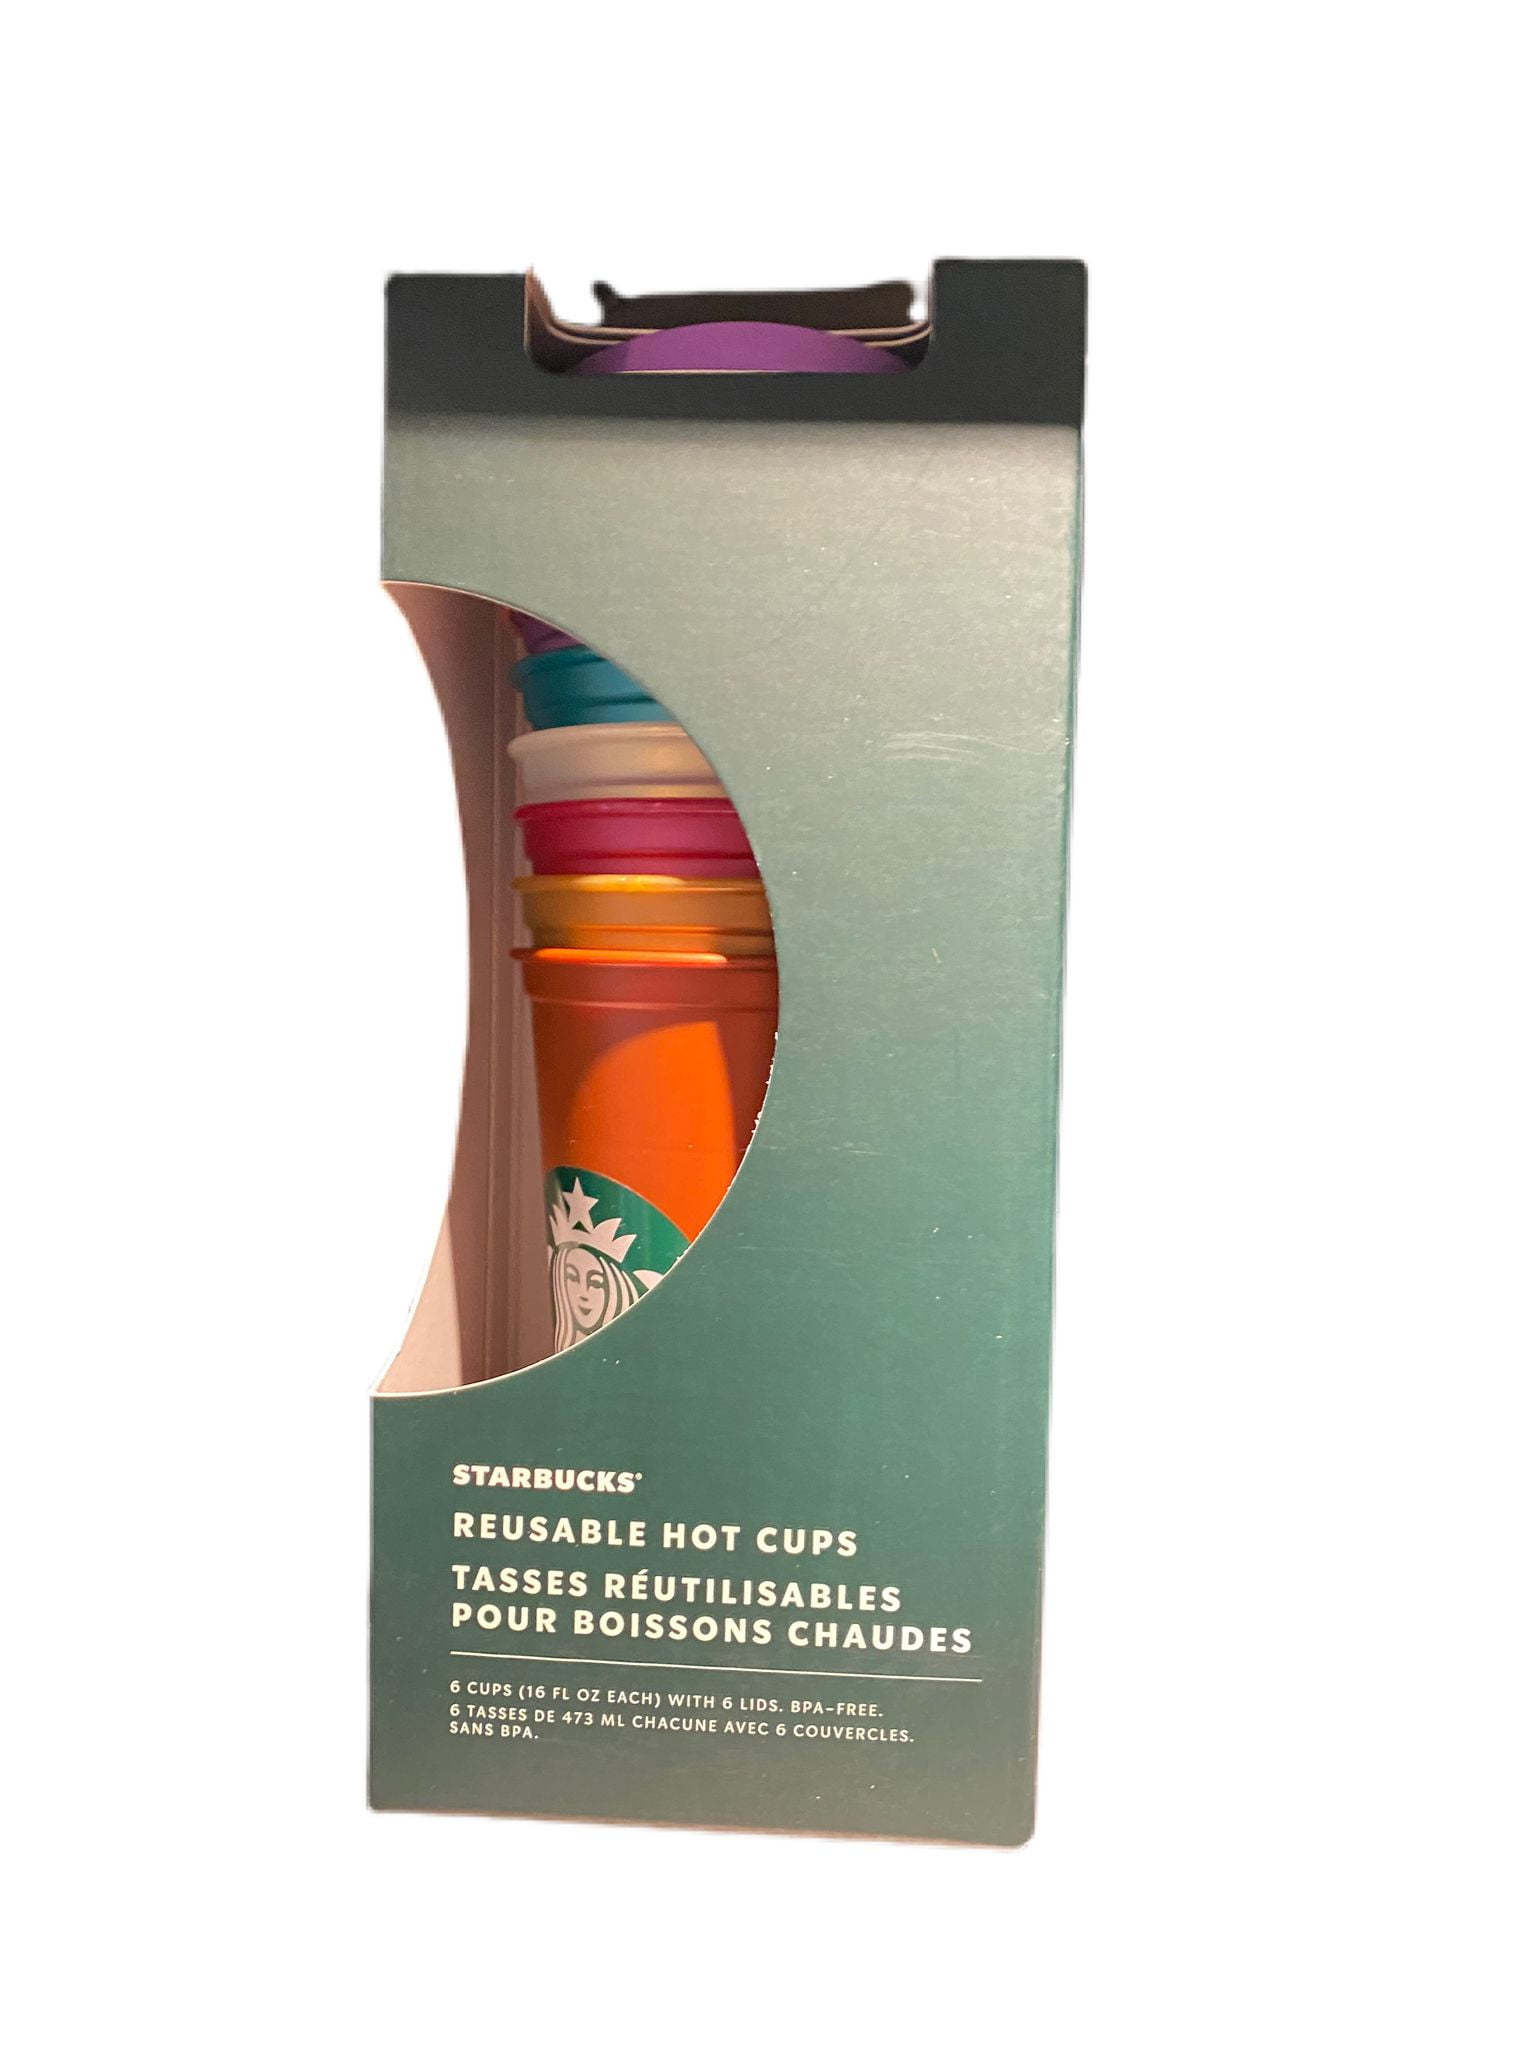 Halloween '19 Reusable Hot Cups 6-Pack Set – Starbies Rules Everything